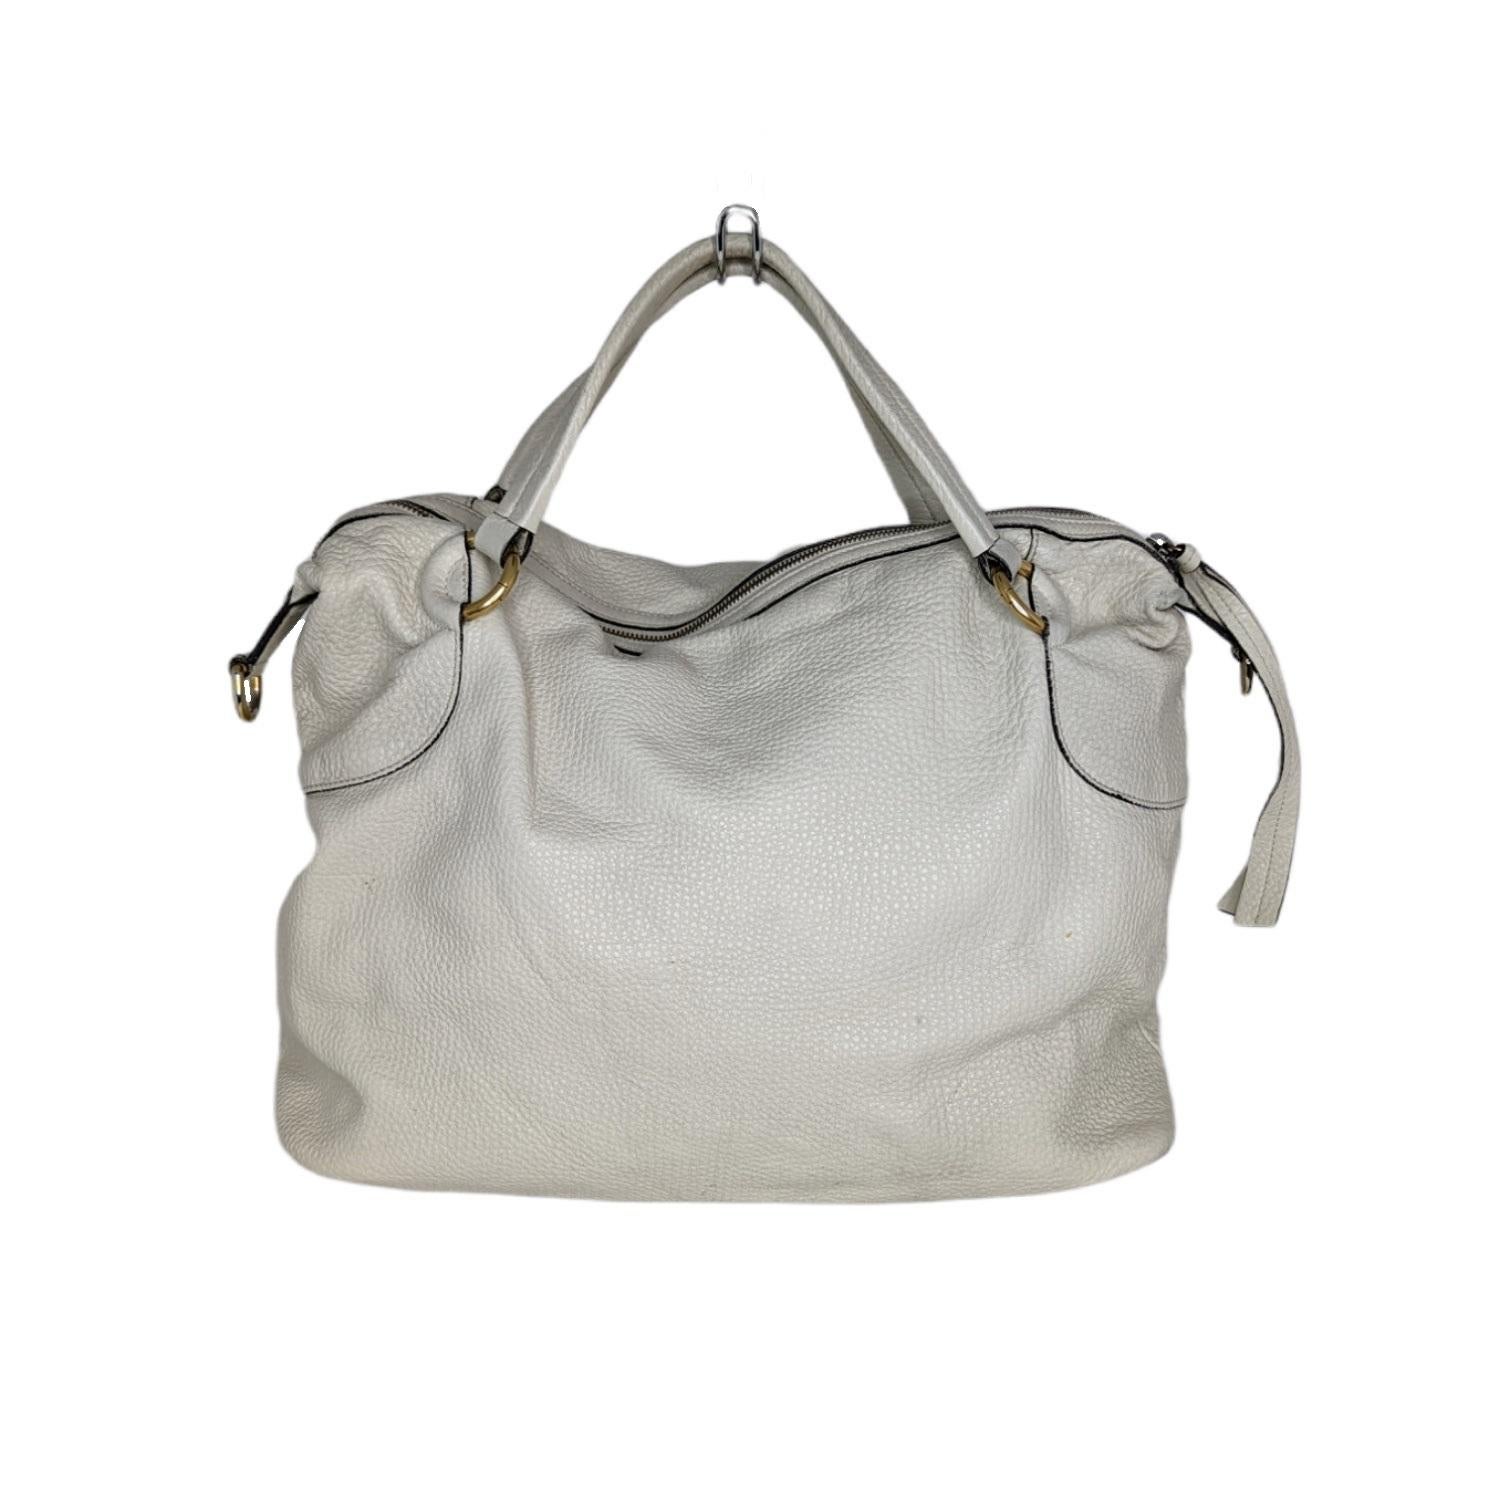 We can always count on Gucci for styles that we love now and later. This versatile Gucci Leather Twill Top Handle Bag is so soft and lightweight and will fit all of your daily essentials in style. The relaxed tote bag features a gorgeous large